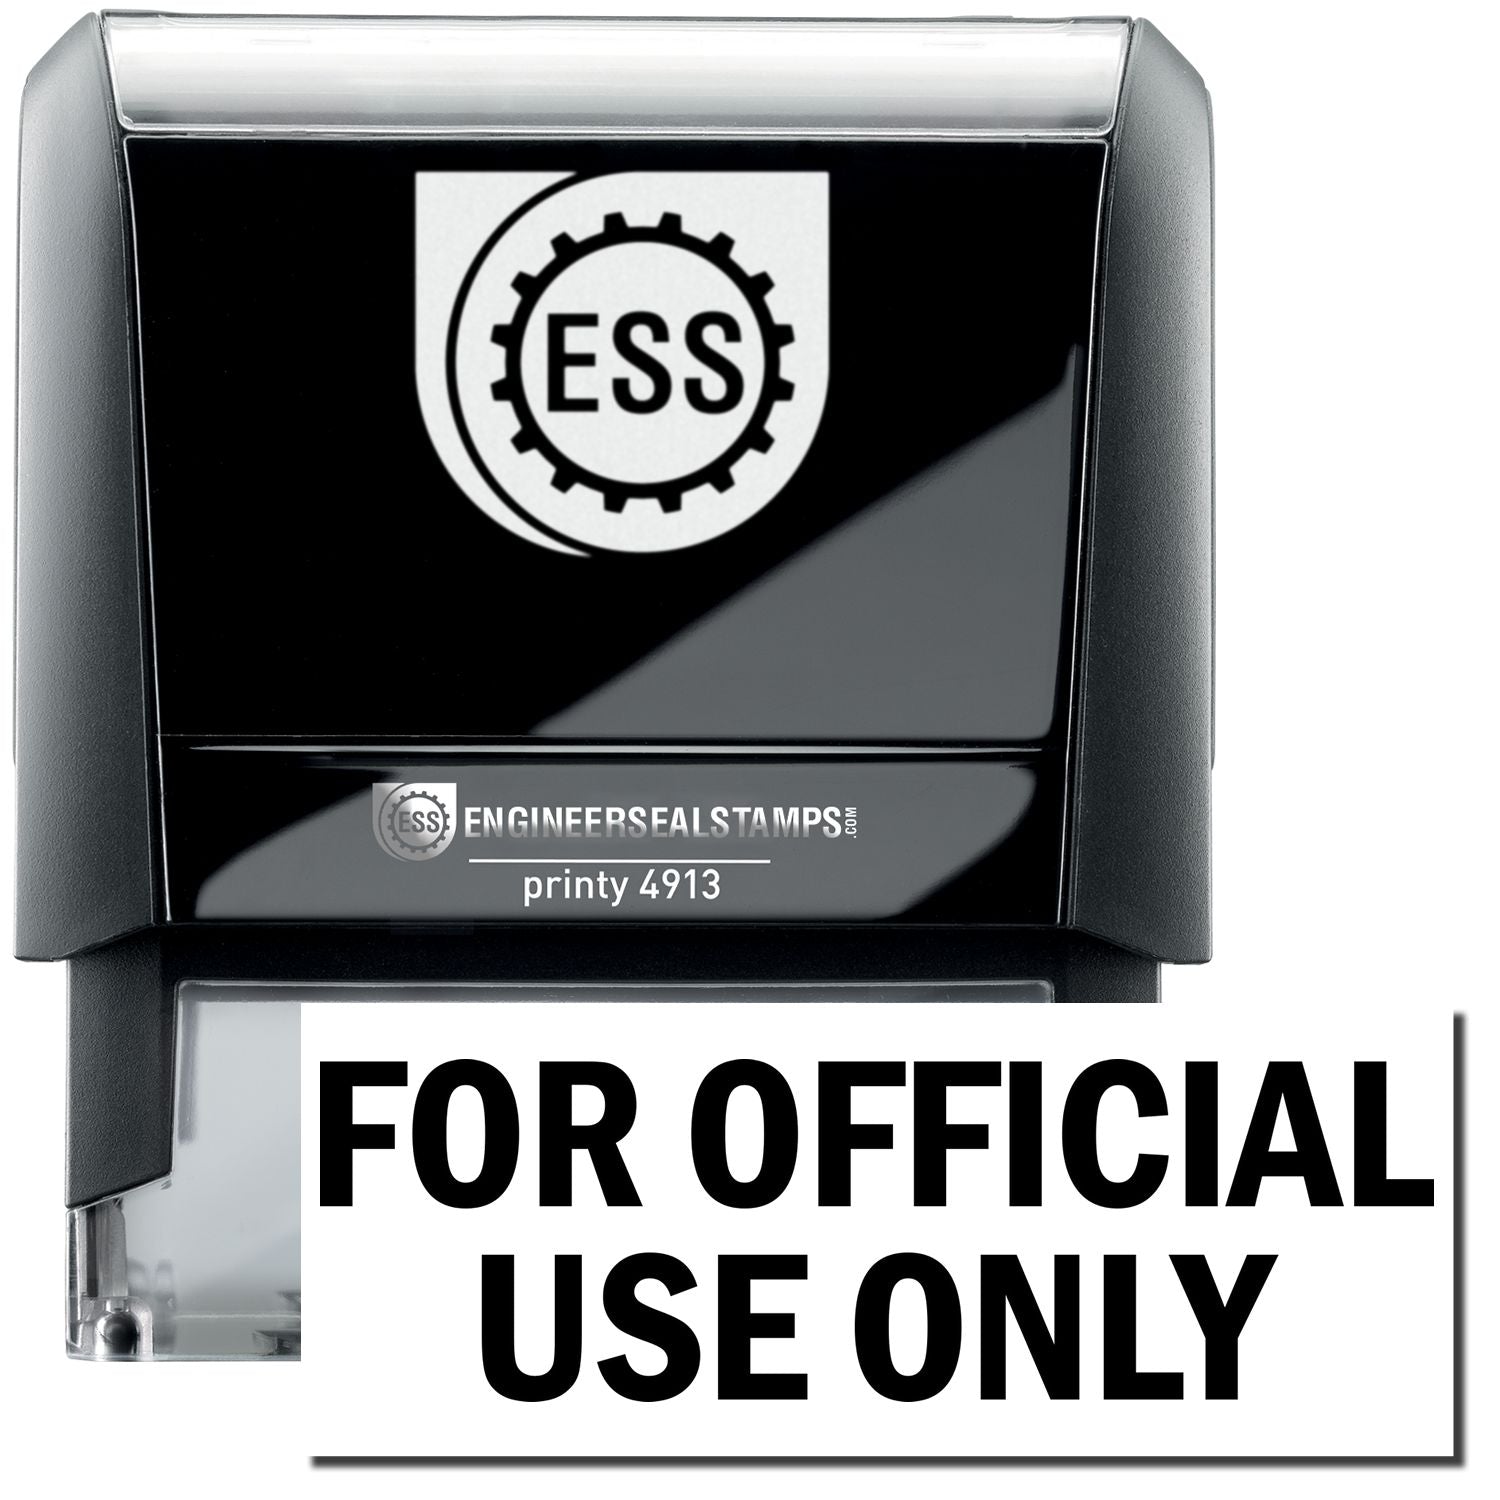 A self-inking stamp with a stamped image showing how the text "FOR OFFICIAL USE ONLY" in a large font is displayed by it after stamping.